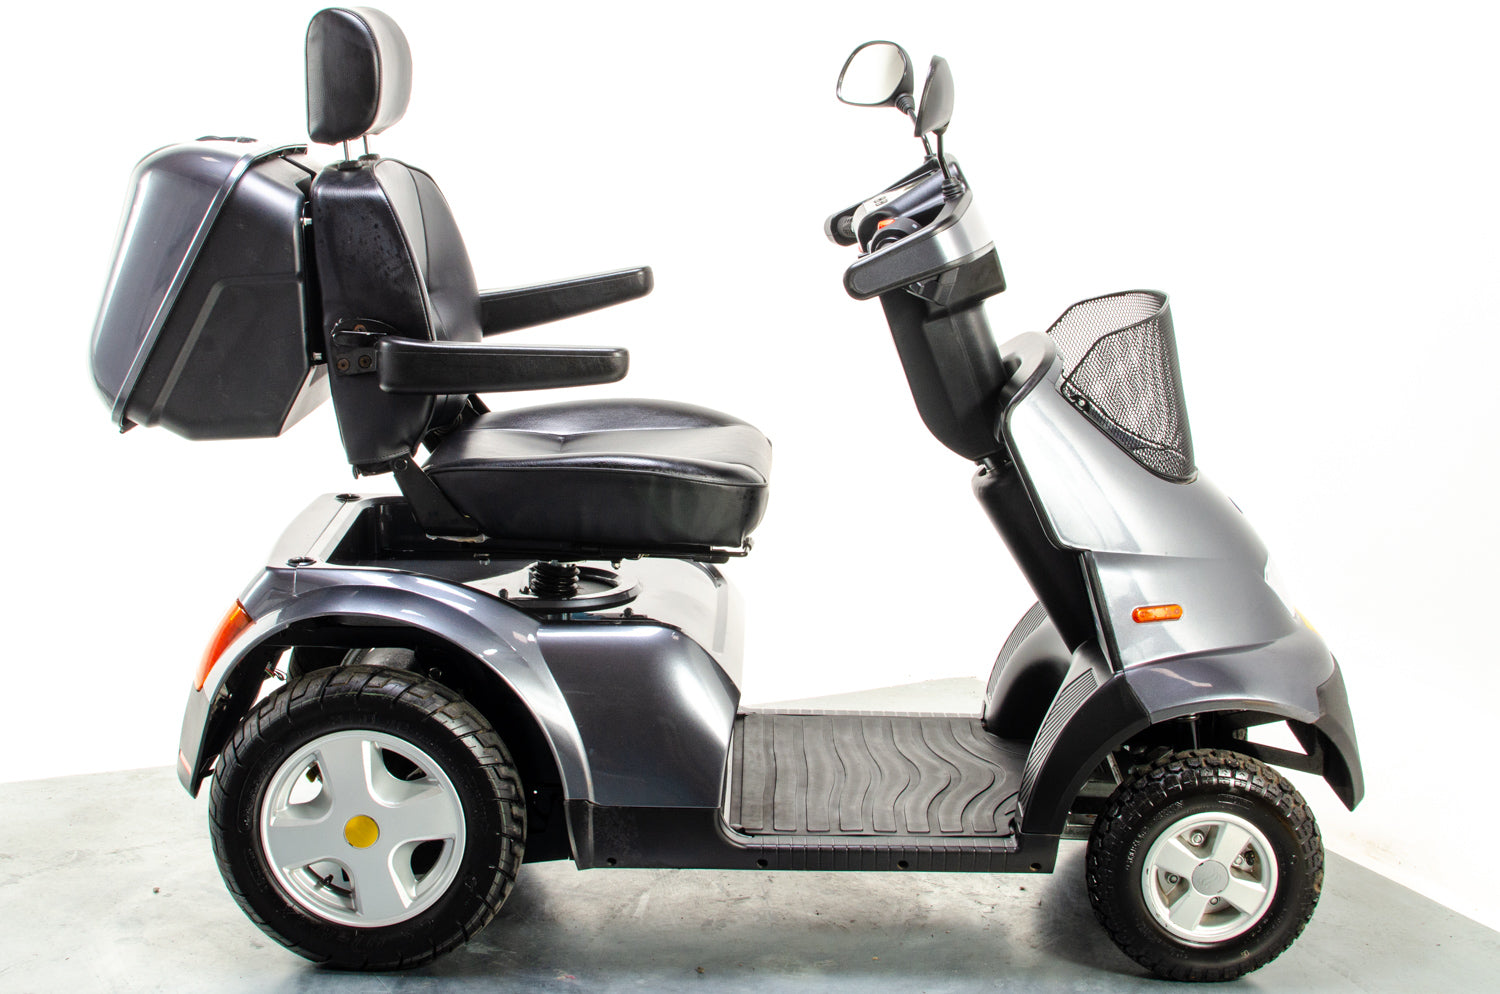 TGA Breeze S4 Used Mobility Scooter 8mph Large All-Terrain Road Legal Off-Road Grey